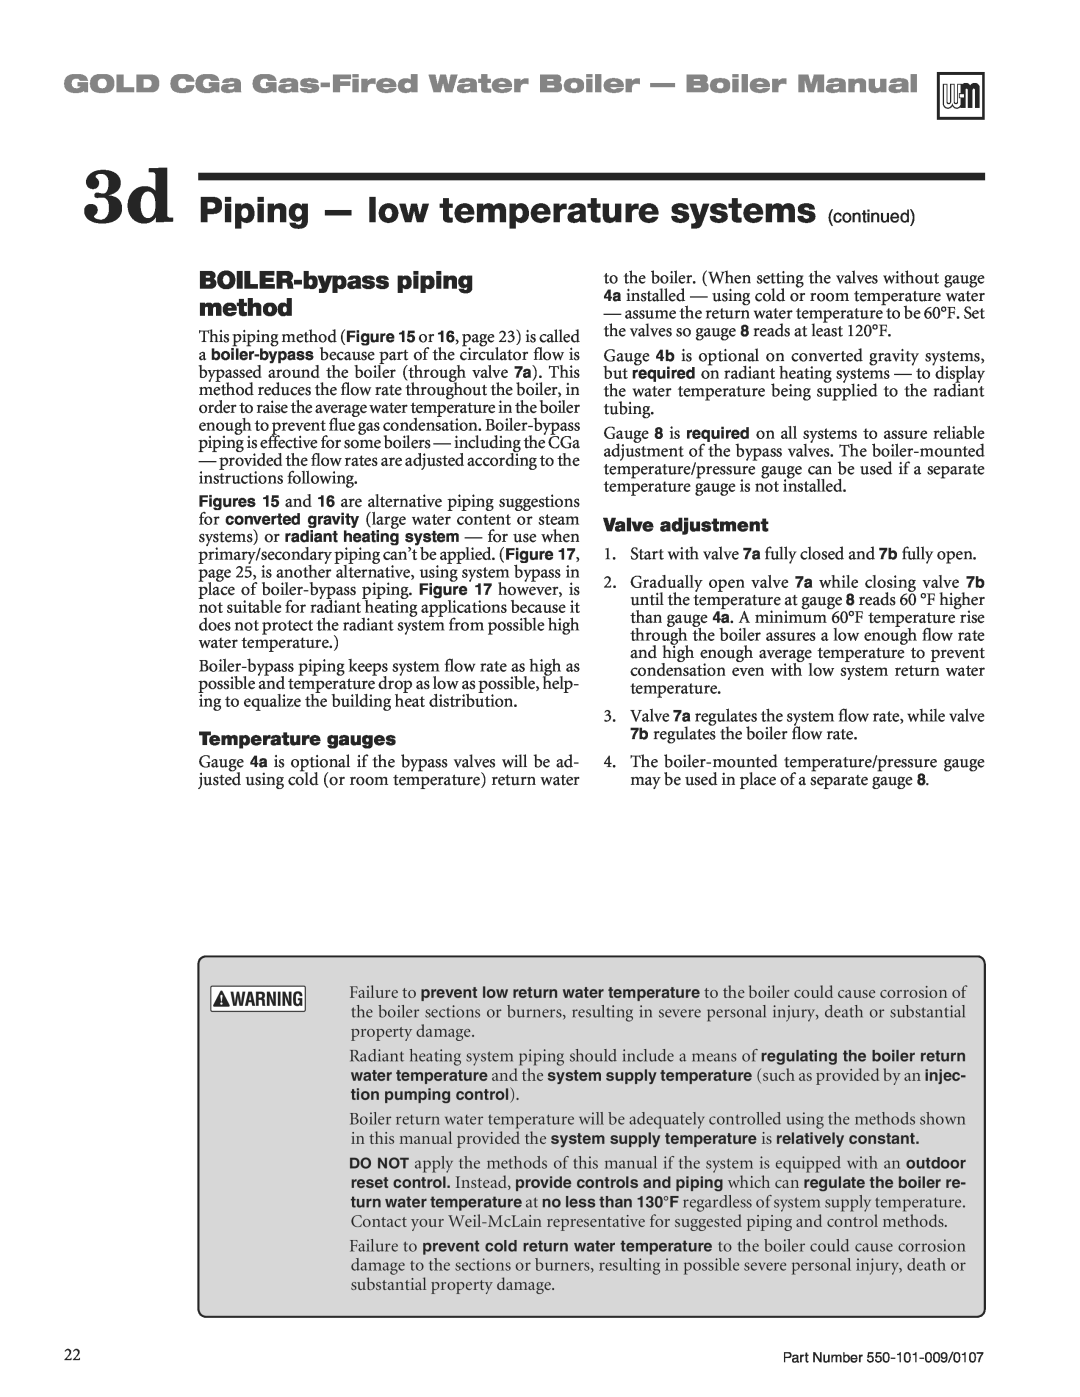 Weil-McLain CGA25SPDN manual 3d Piping - low temperature systems continued, GOLD CGa Gas-FiredWater Boiler - Boiler Manual 